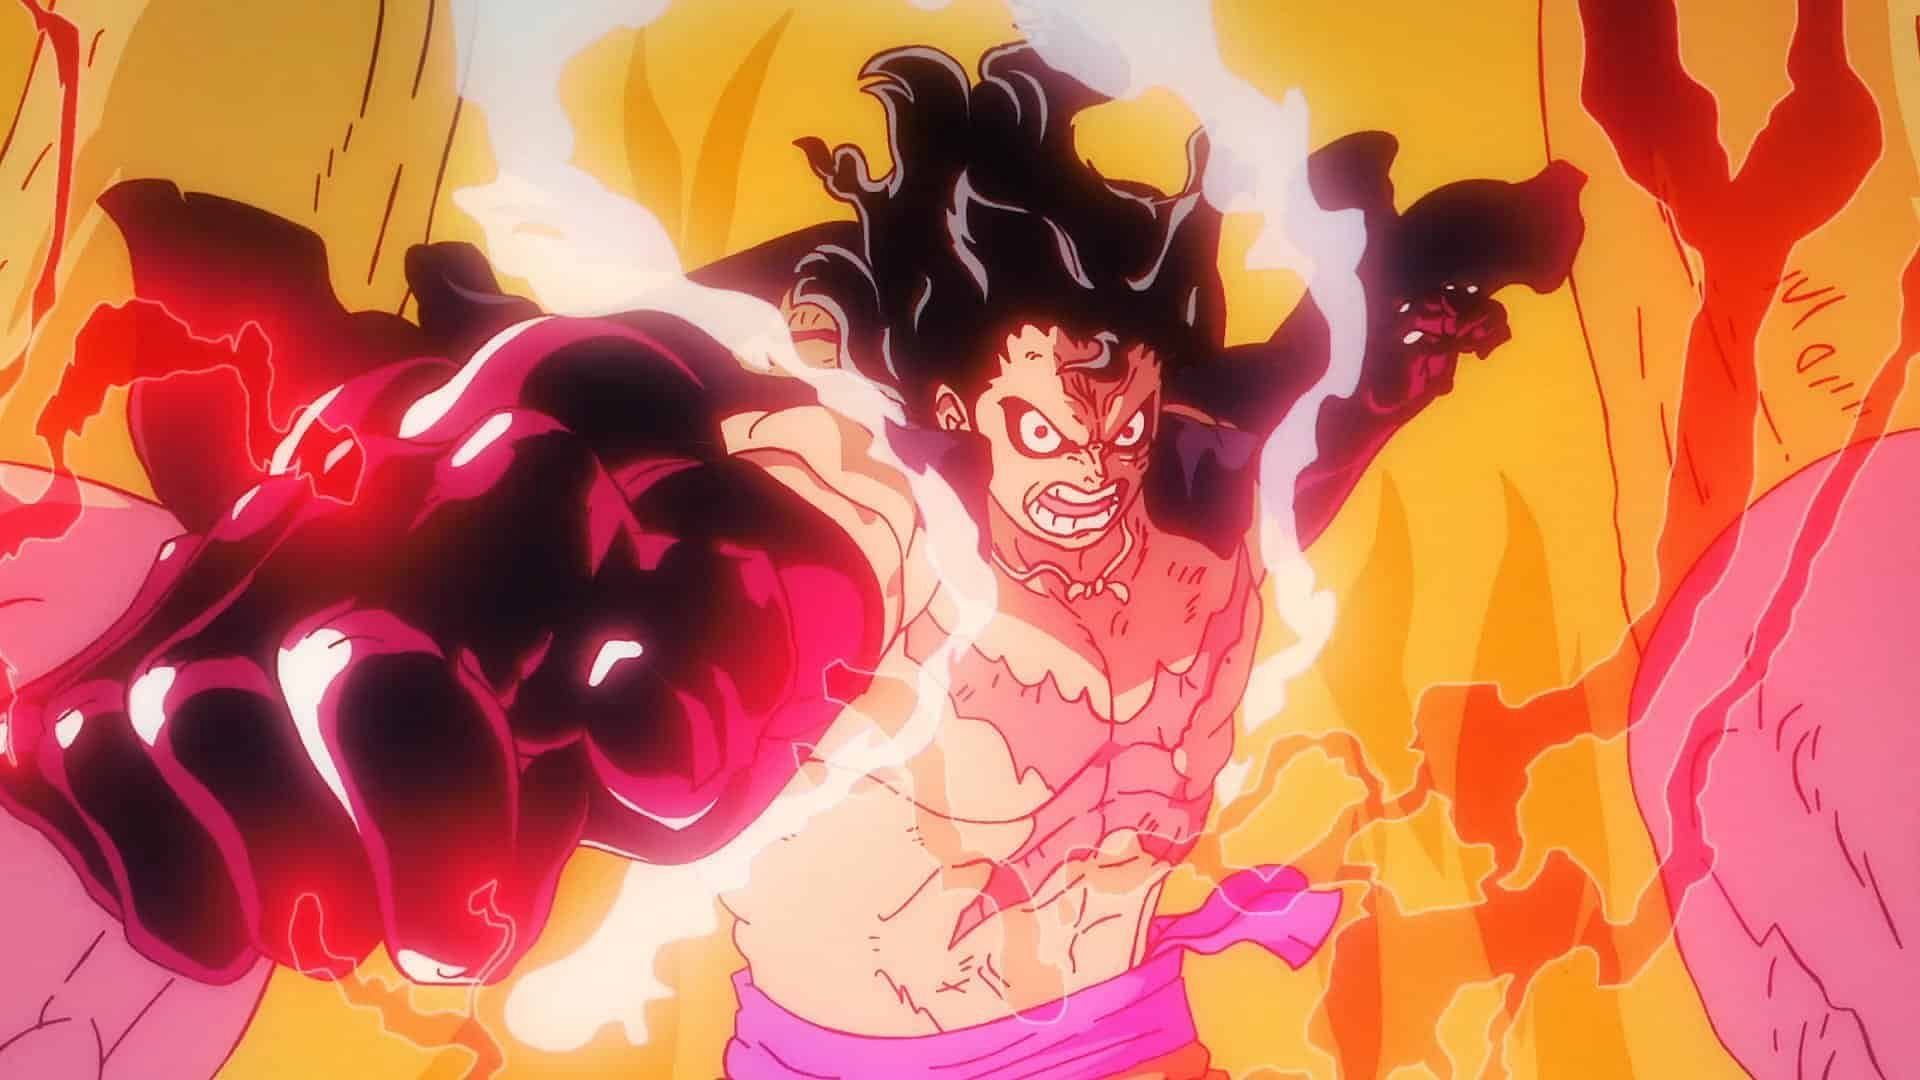 Fans are expecting the high-octane action to continue in One Piece Episode 1055 (Image via Toei Animation)